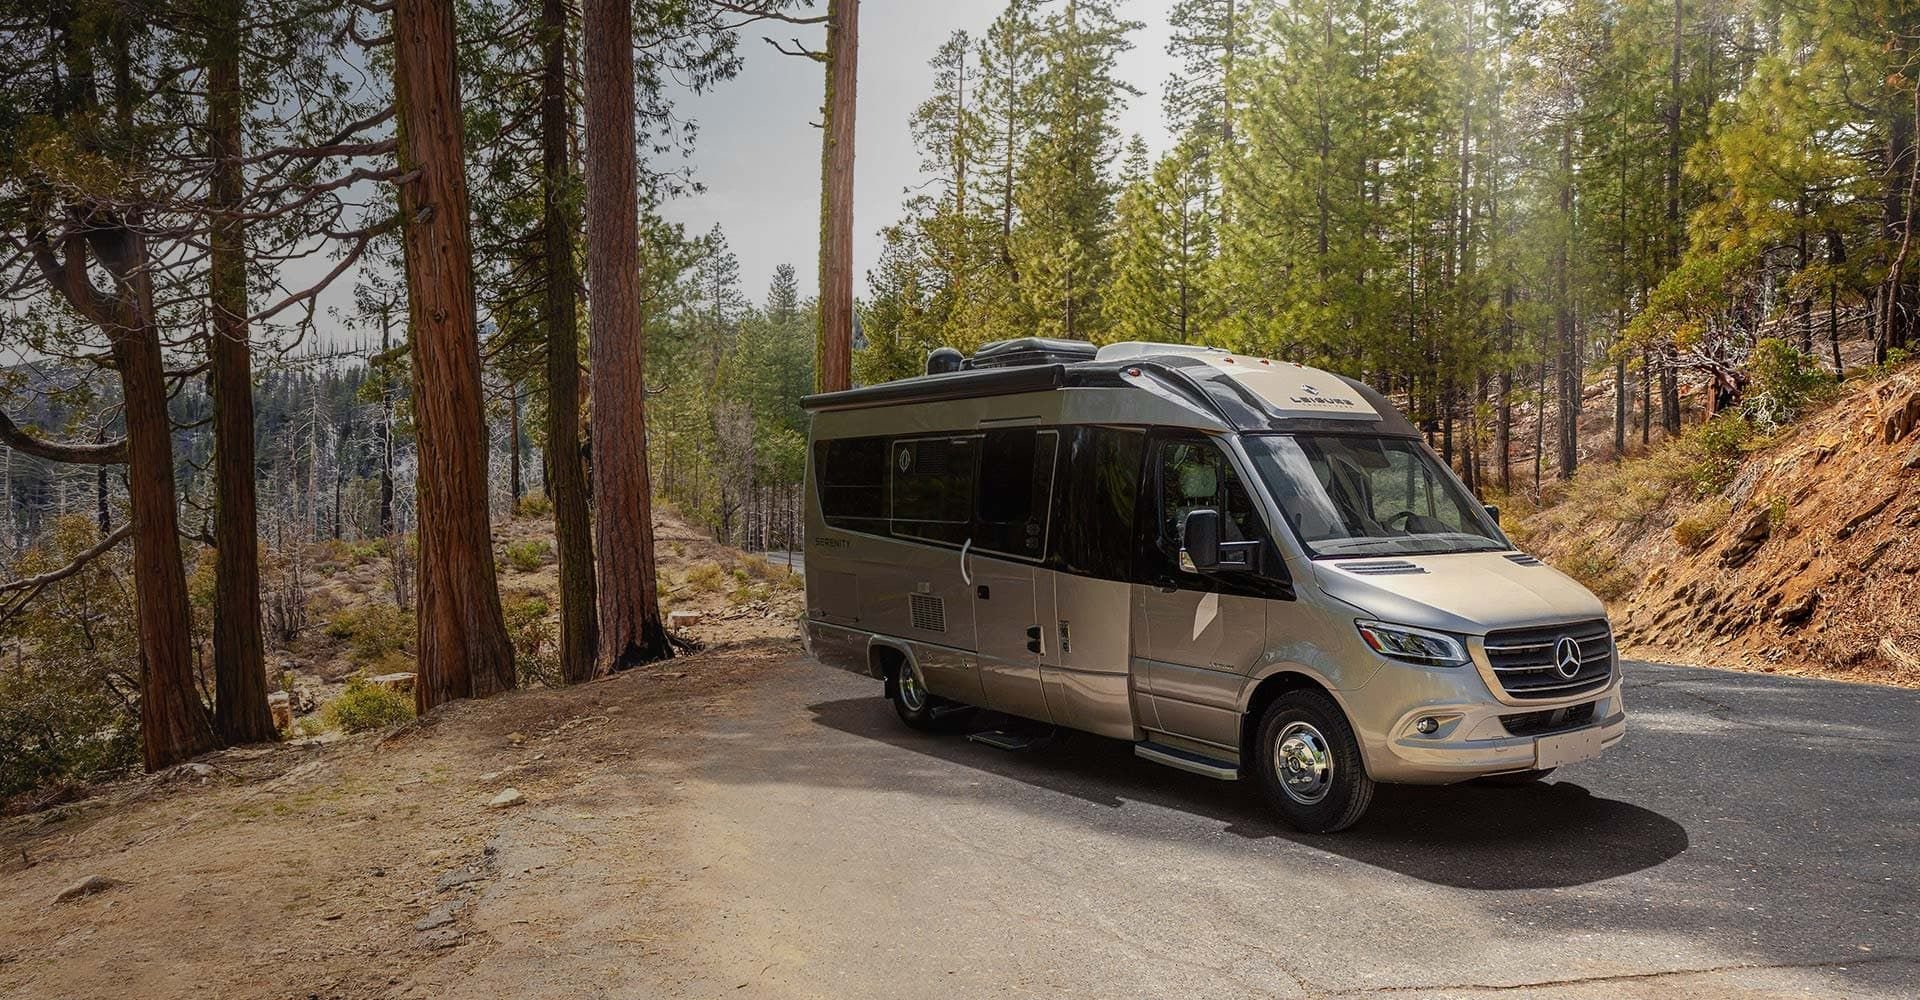  These Are The 10 Best Small RVs Money Can Buy